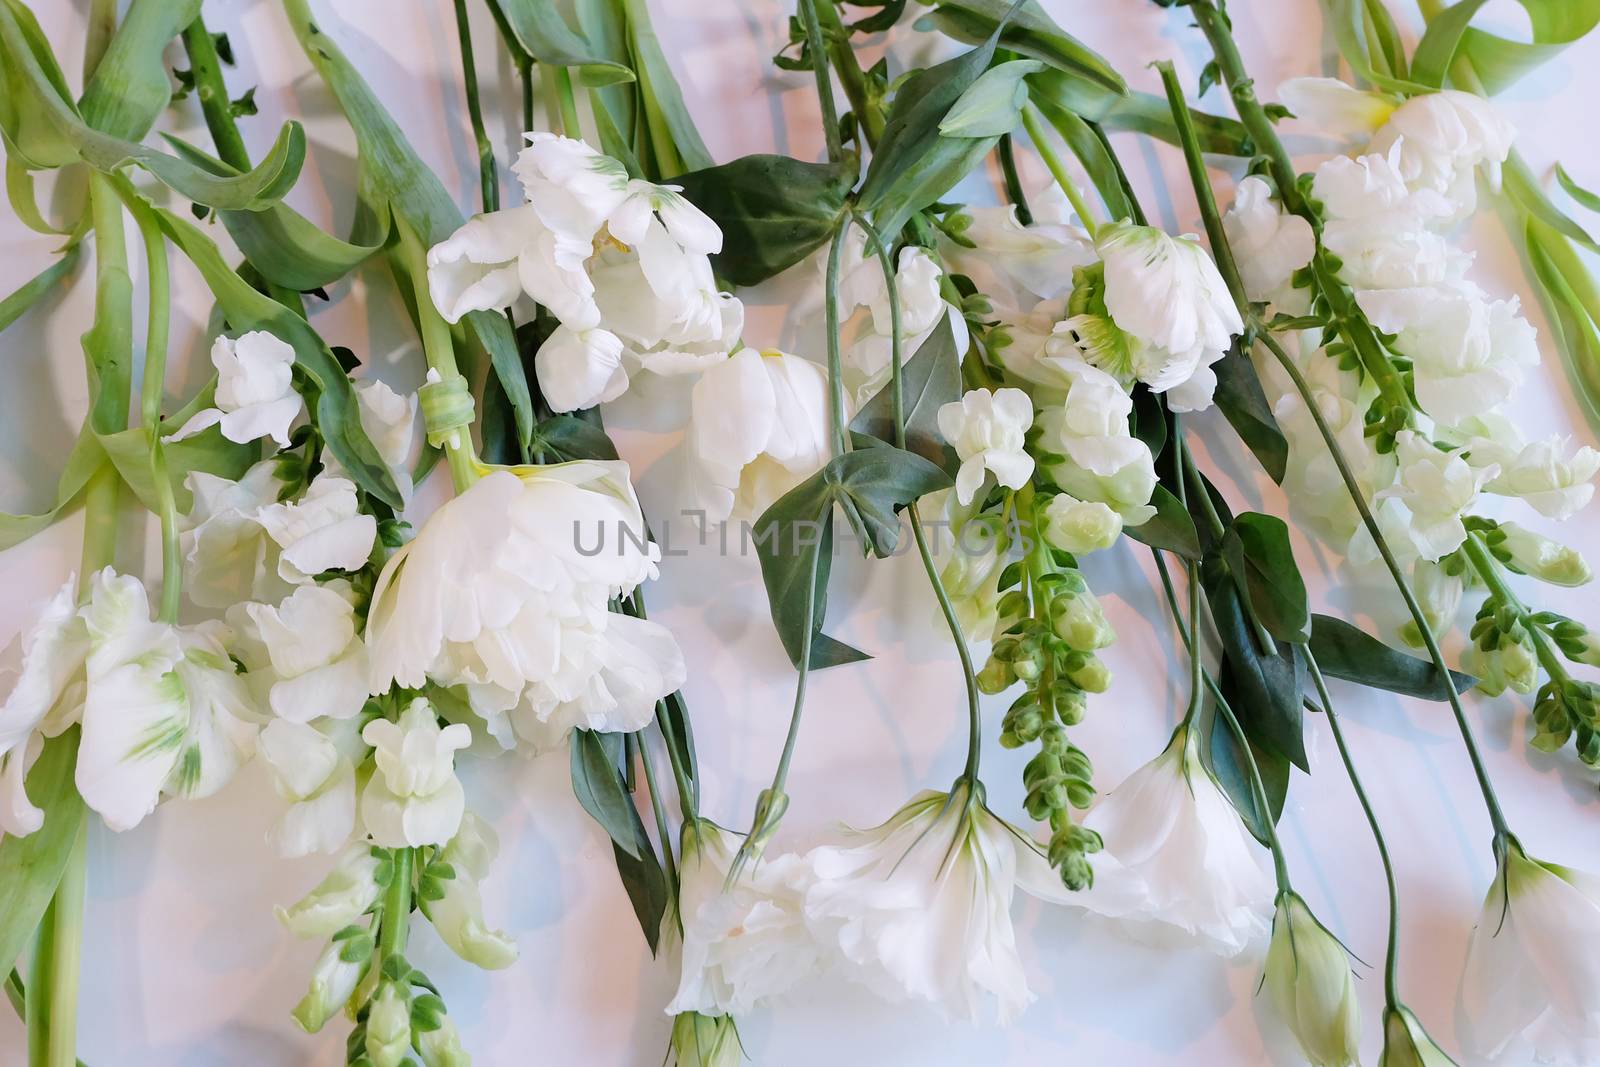 Assorment of white and green flowers laid out in a row on a white surface